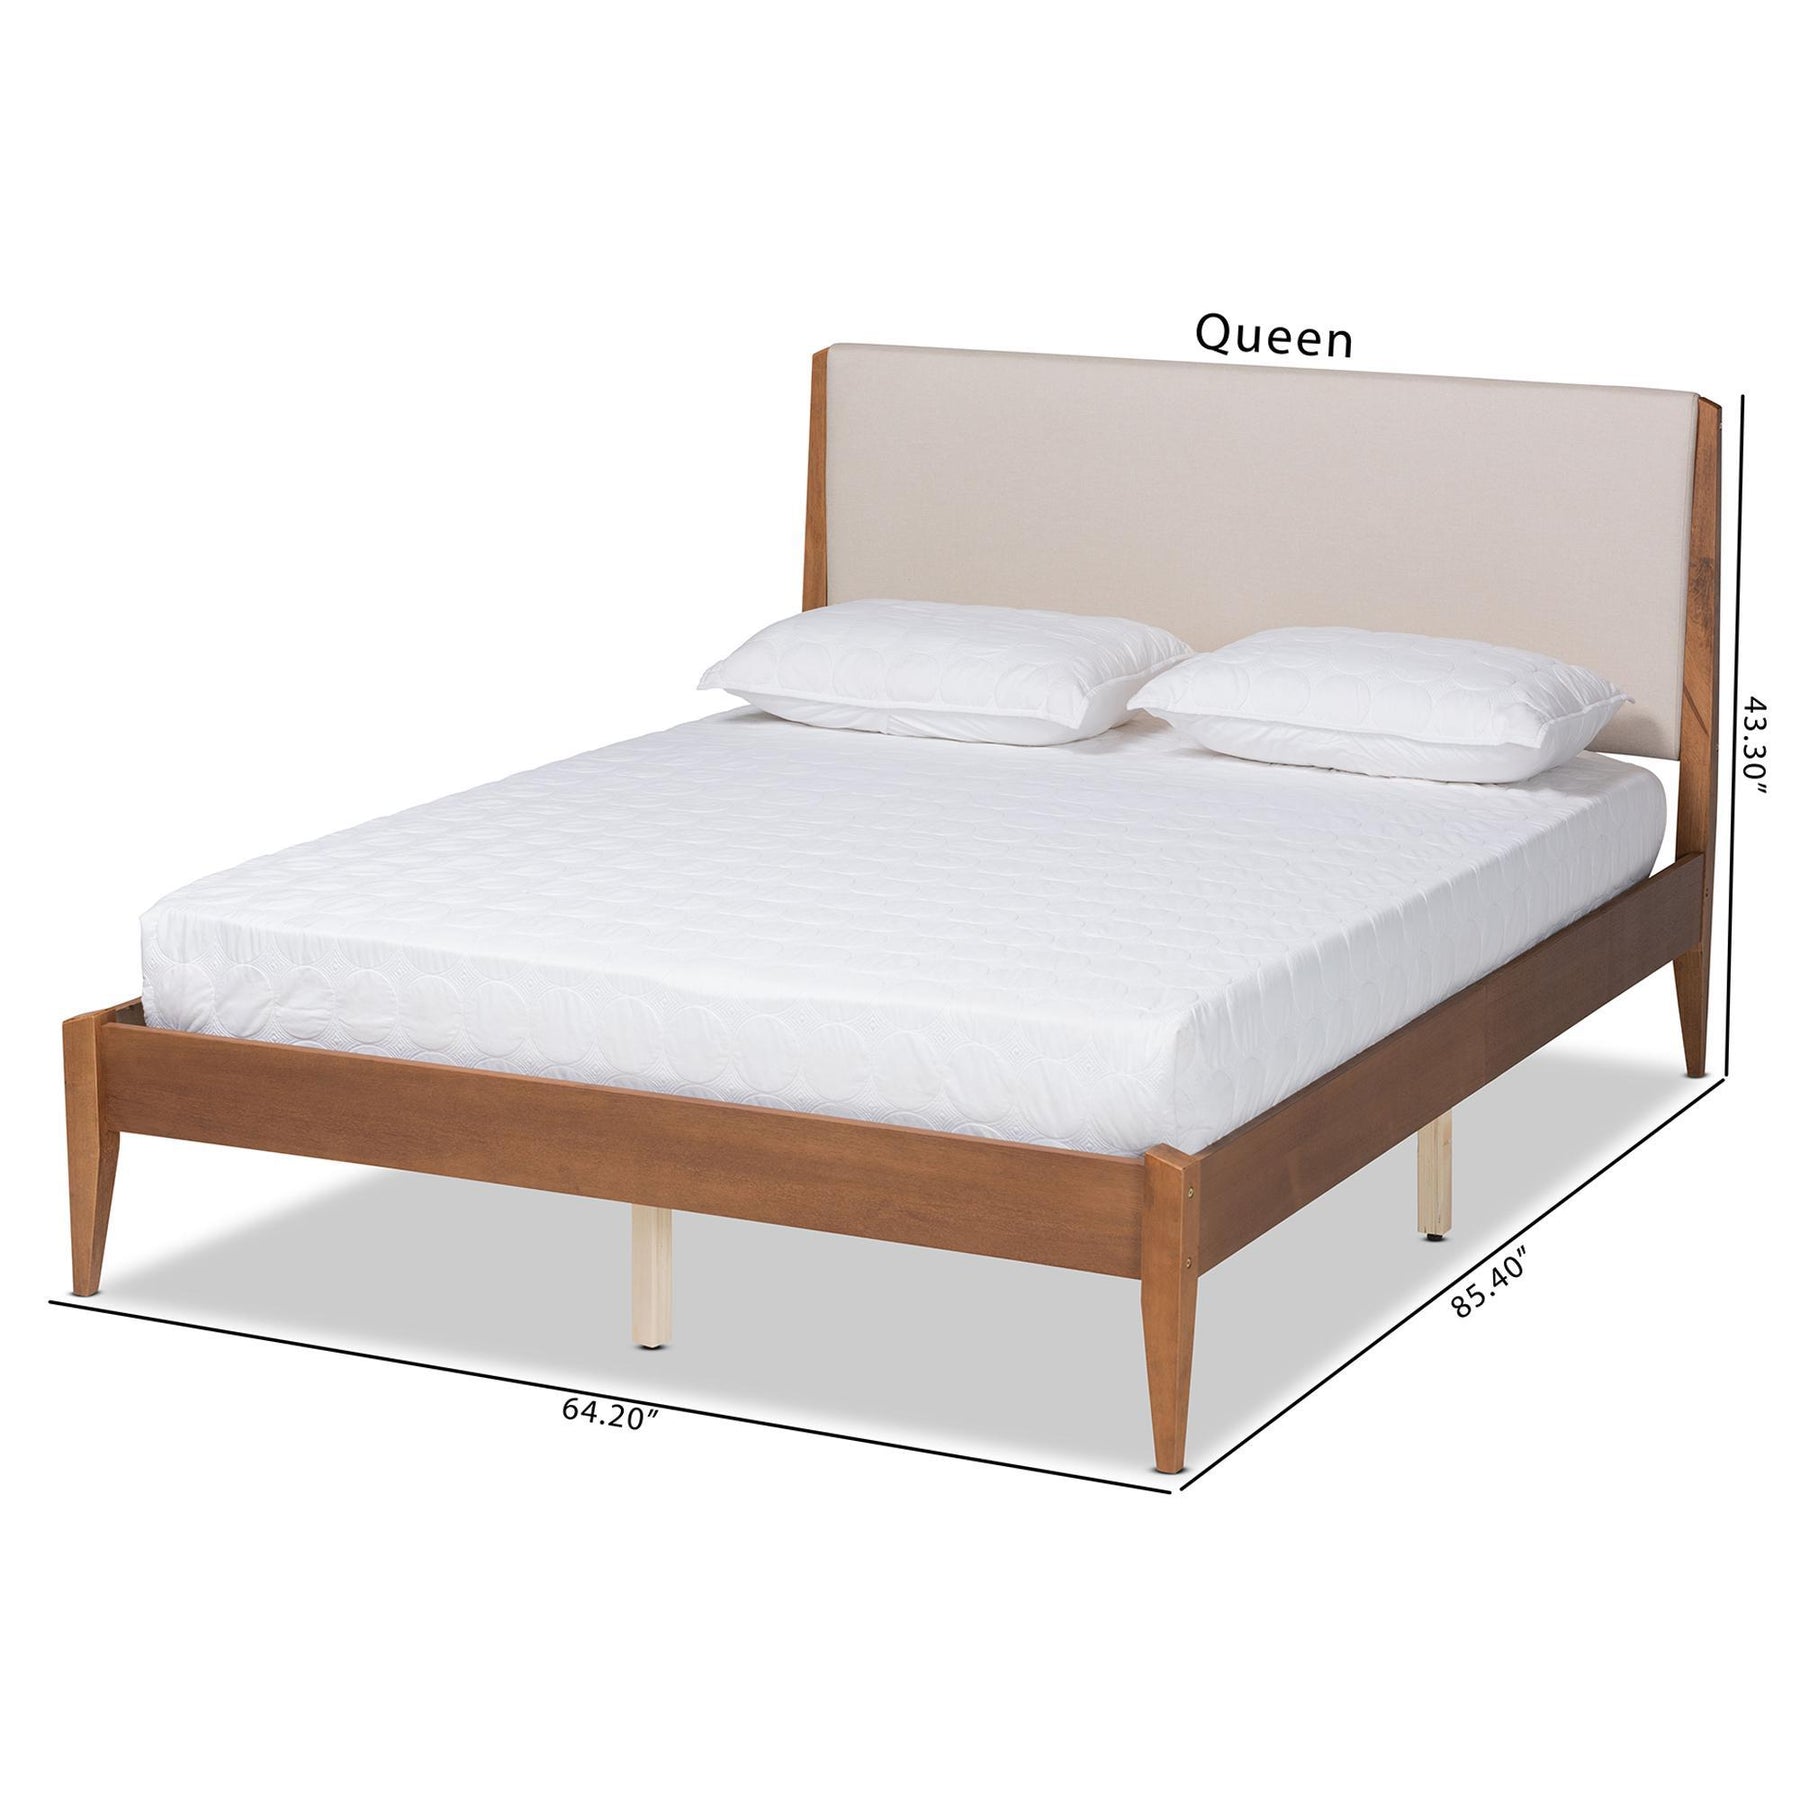 Baxton Studio Lenora Mid-Century Modern Beige Fabric Upholstered And Walnut Brown Finished Wood Queen Size Platform Bed - MG0077S-Beige/Walnut-Queen